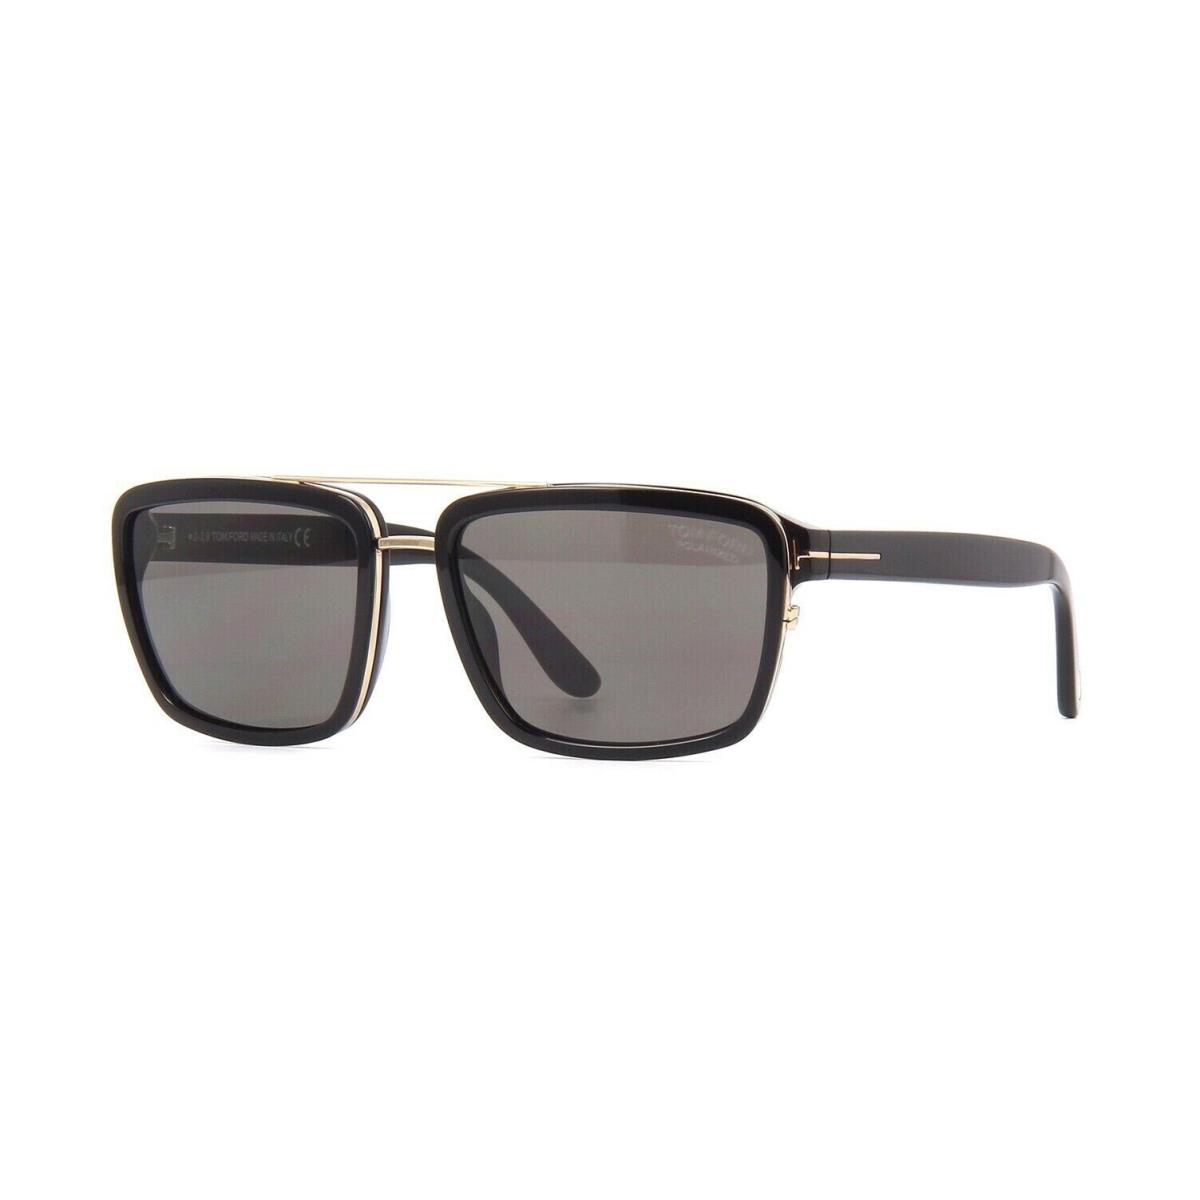 Tom Ford Anders FT 0780 01D Shiny Black/grey Polarized Sunglasses 58mm